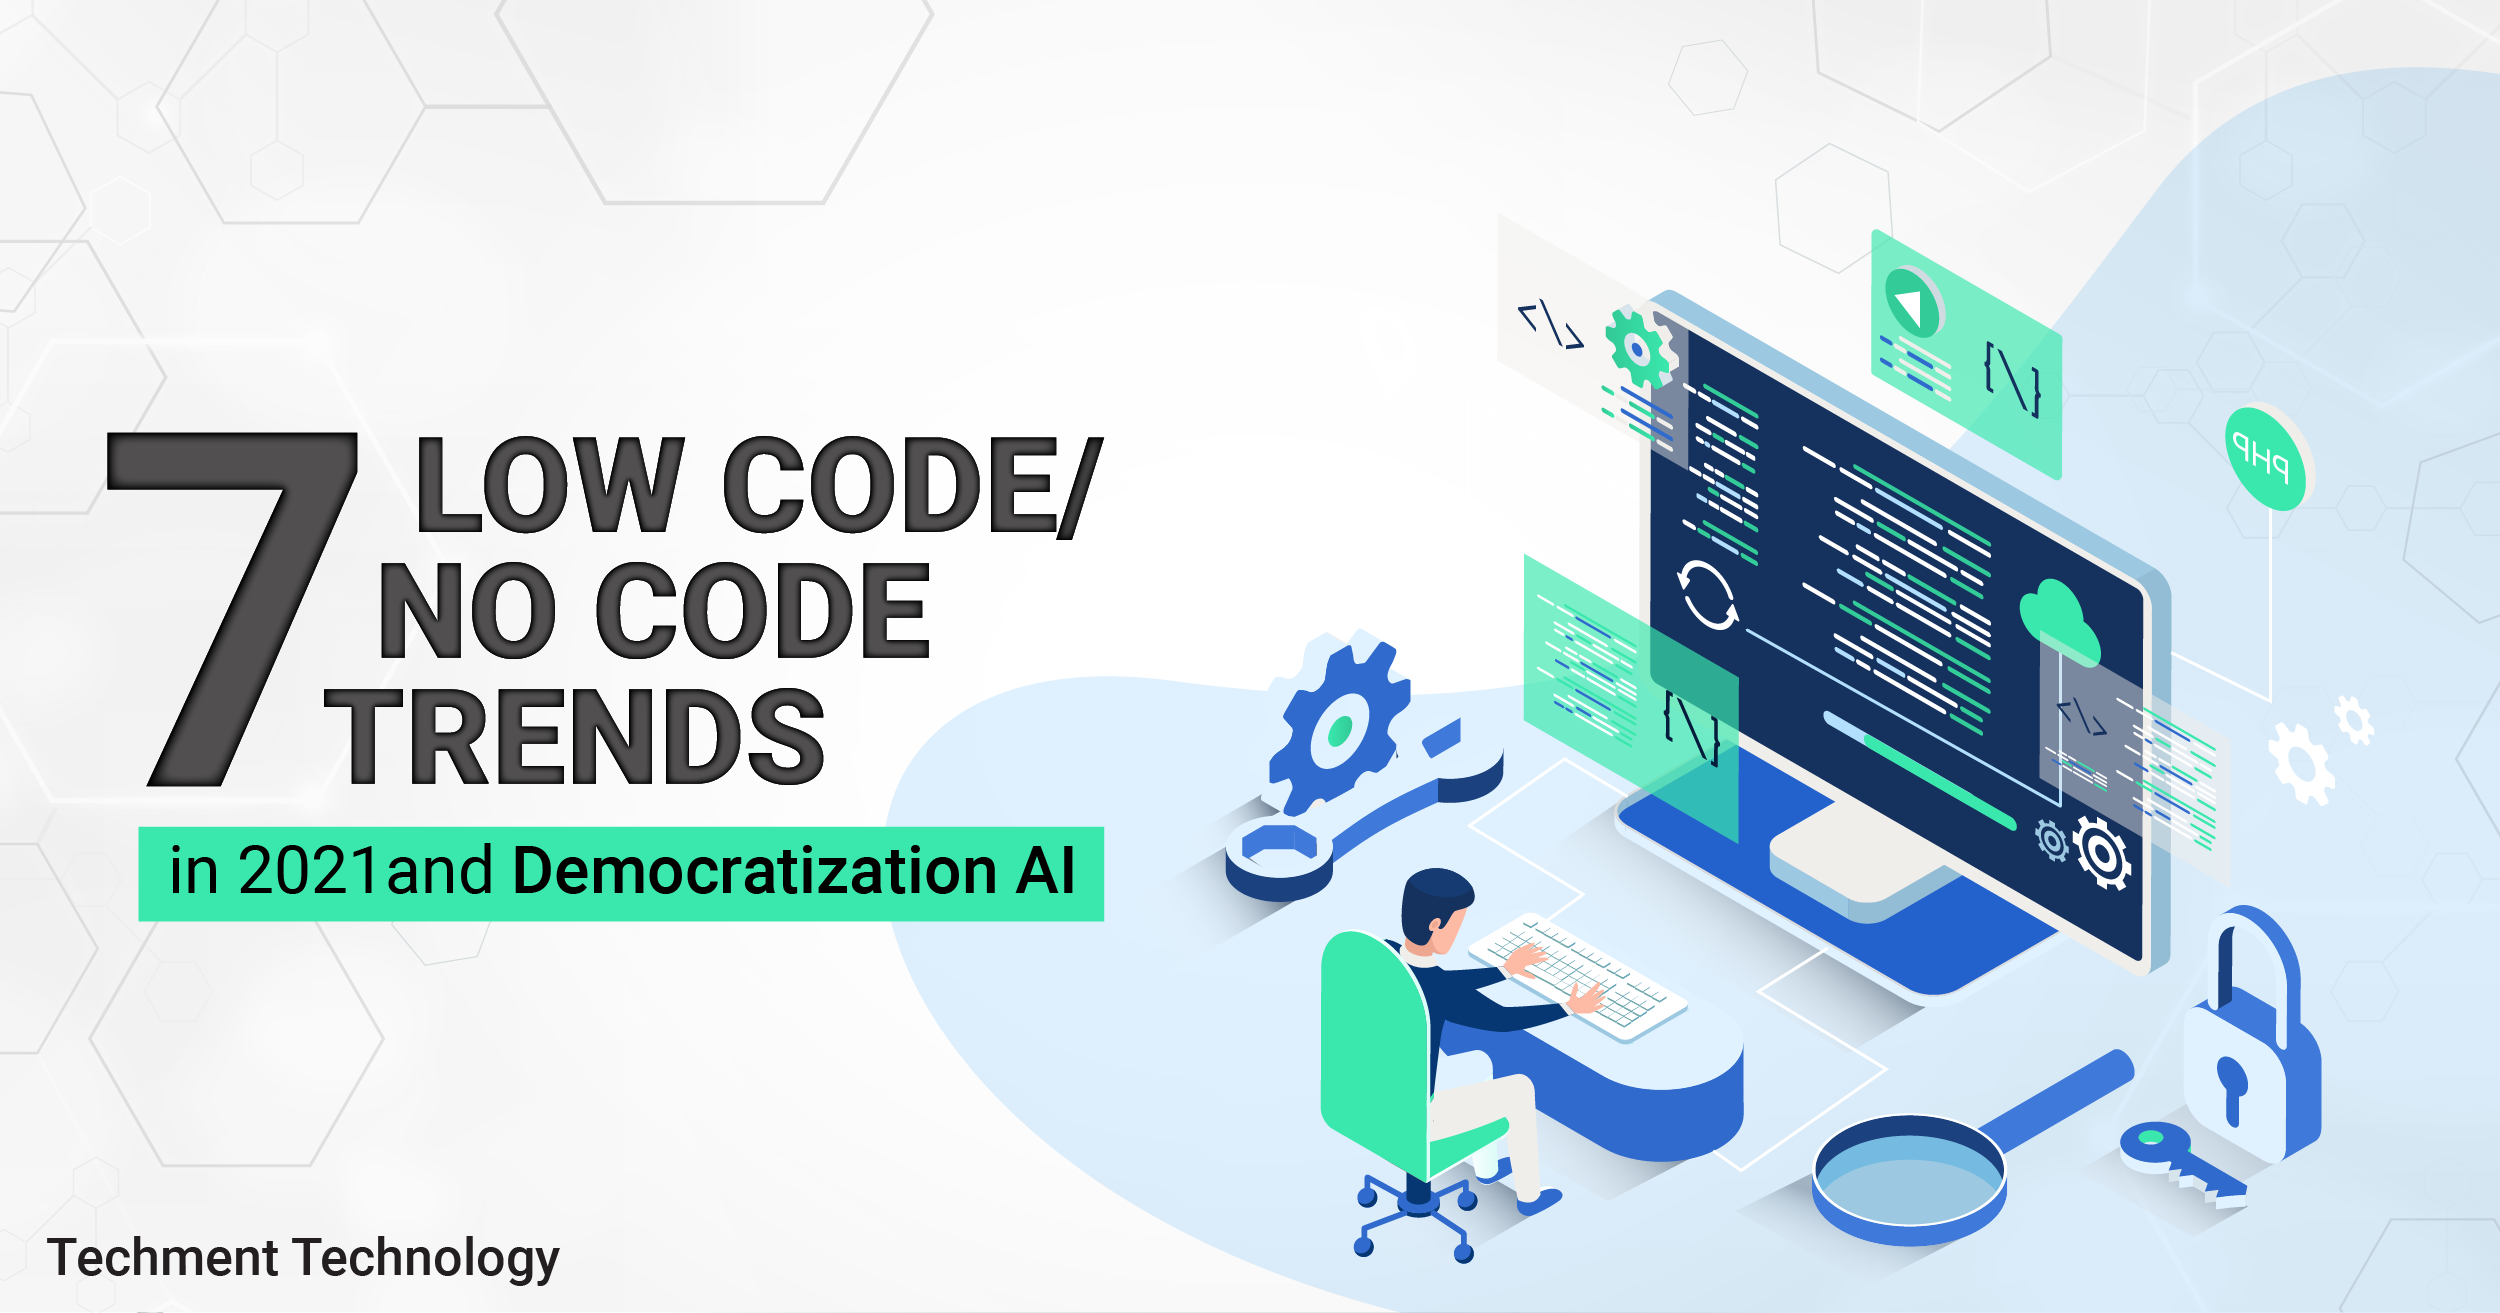 7 Low Code/No Code Trends in 2021 and Democratization AI